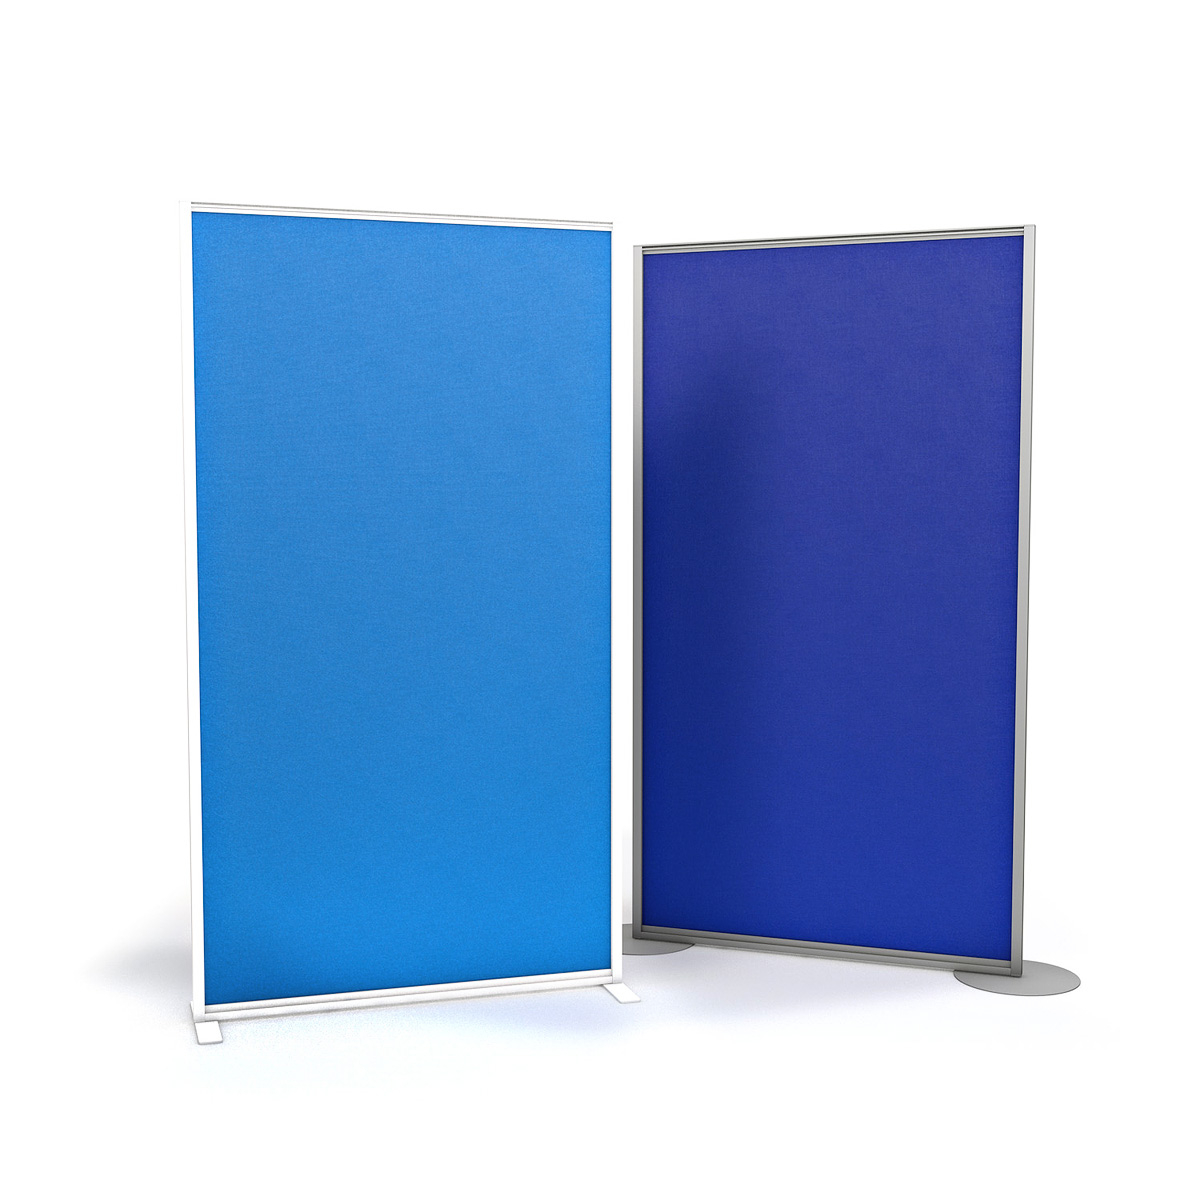 FRONTIER® Free Standing Office Partitions Are Available With Round Disc Feet or Stabilising Feet